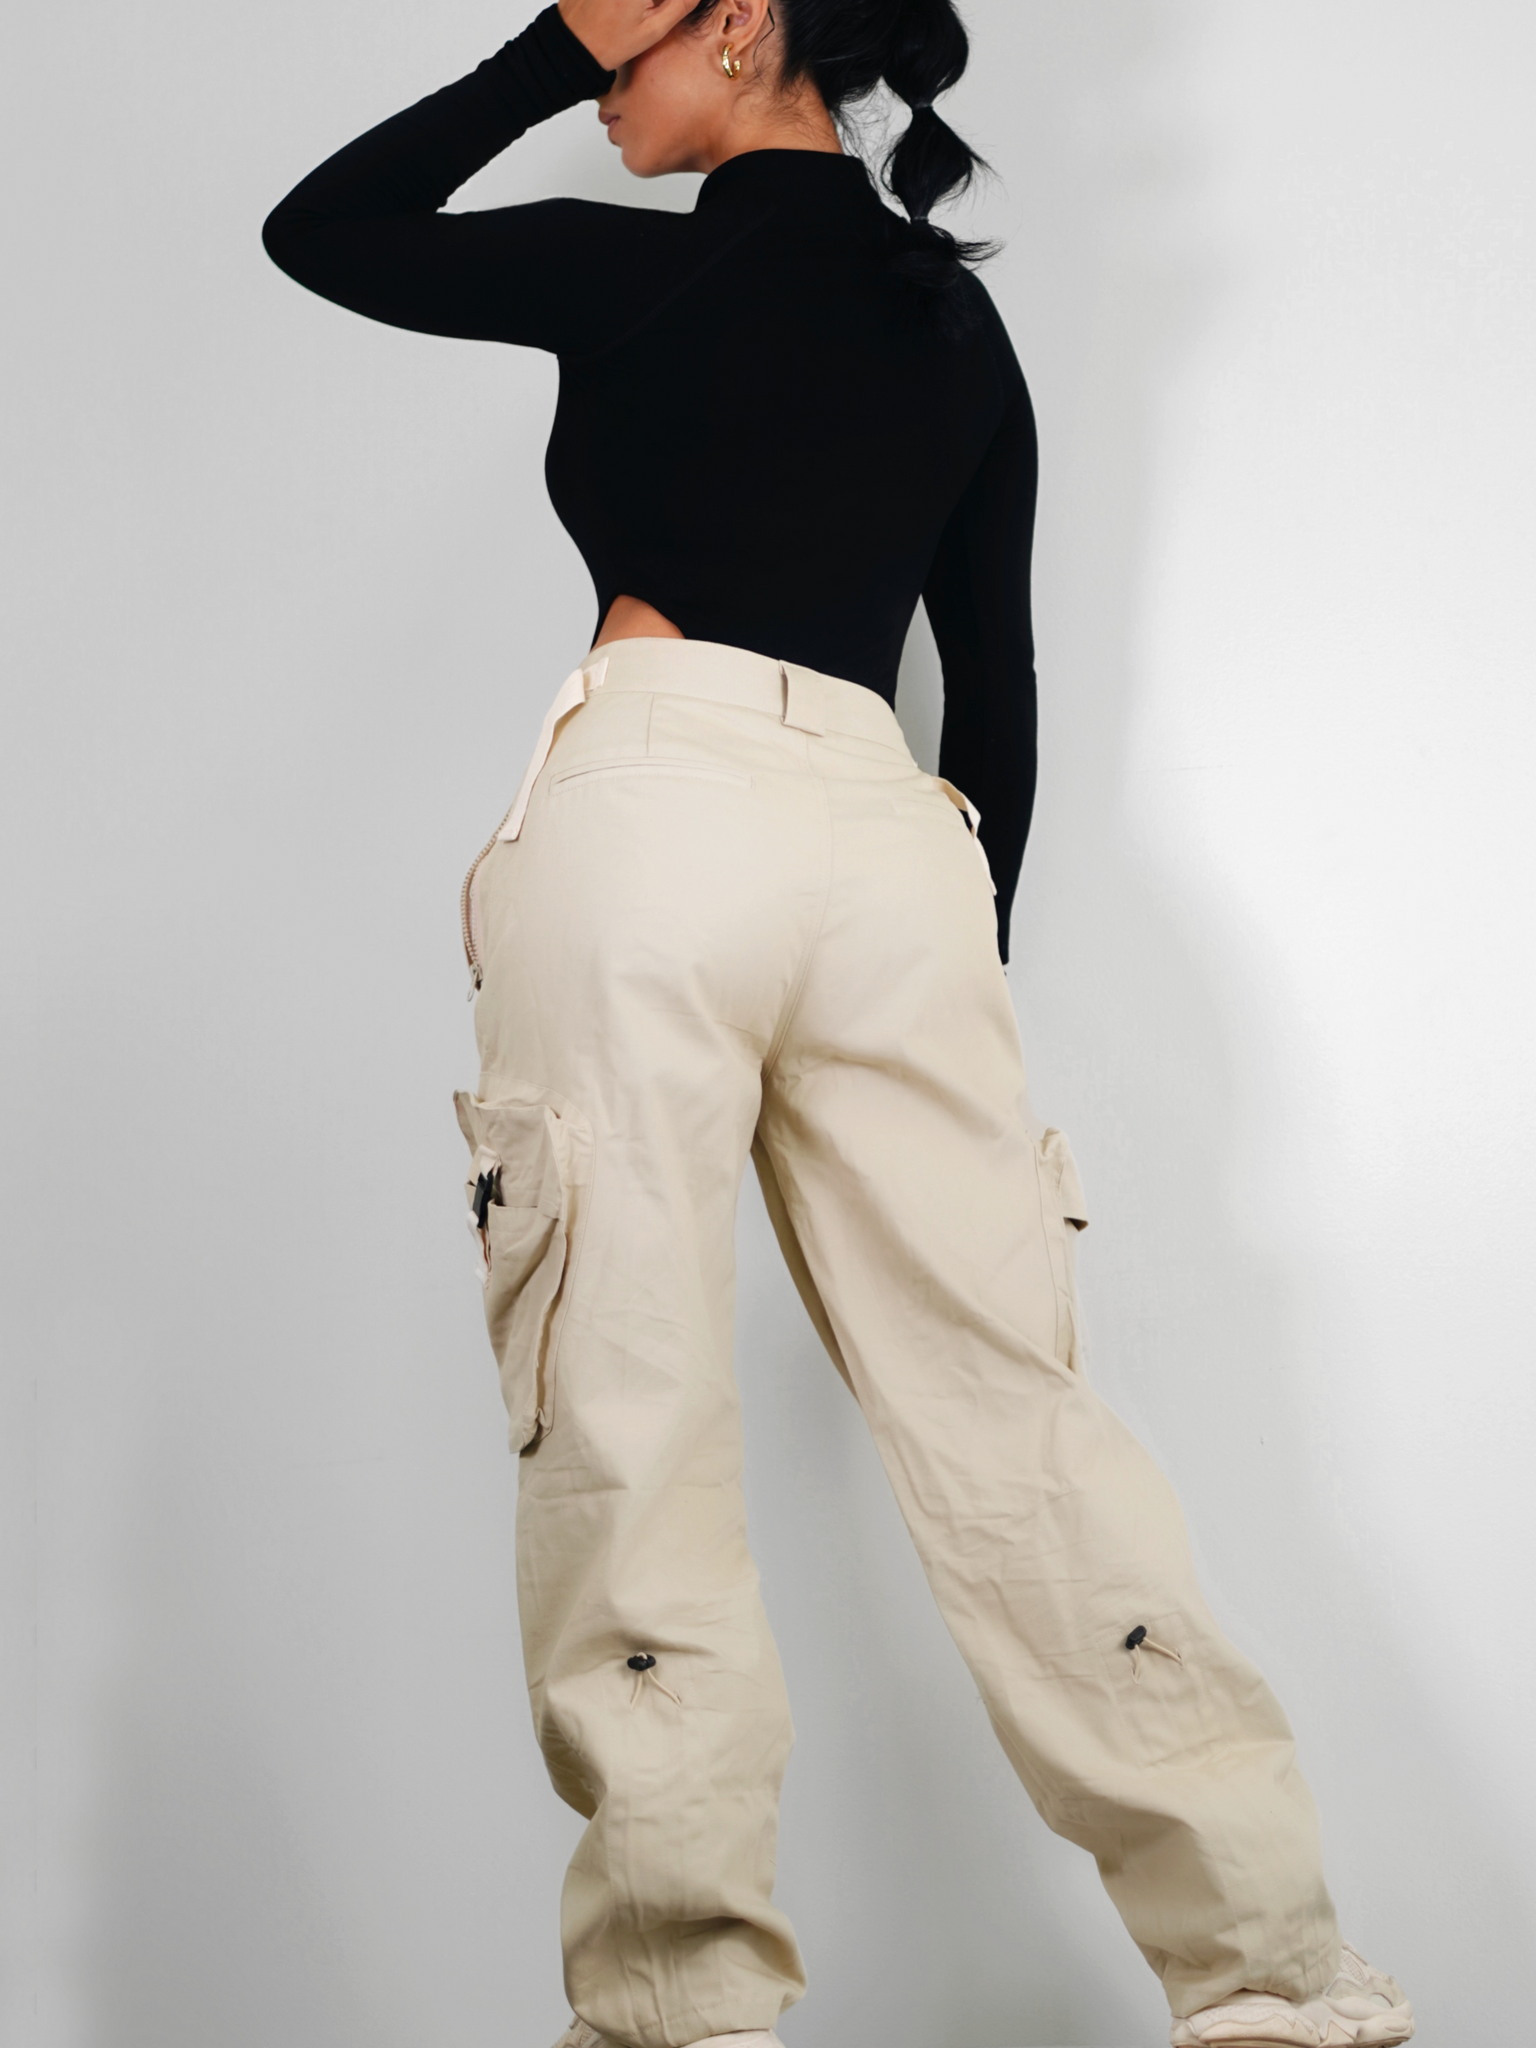 Cargo pants and sandos are my current favorites! Want the pants? Go ch